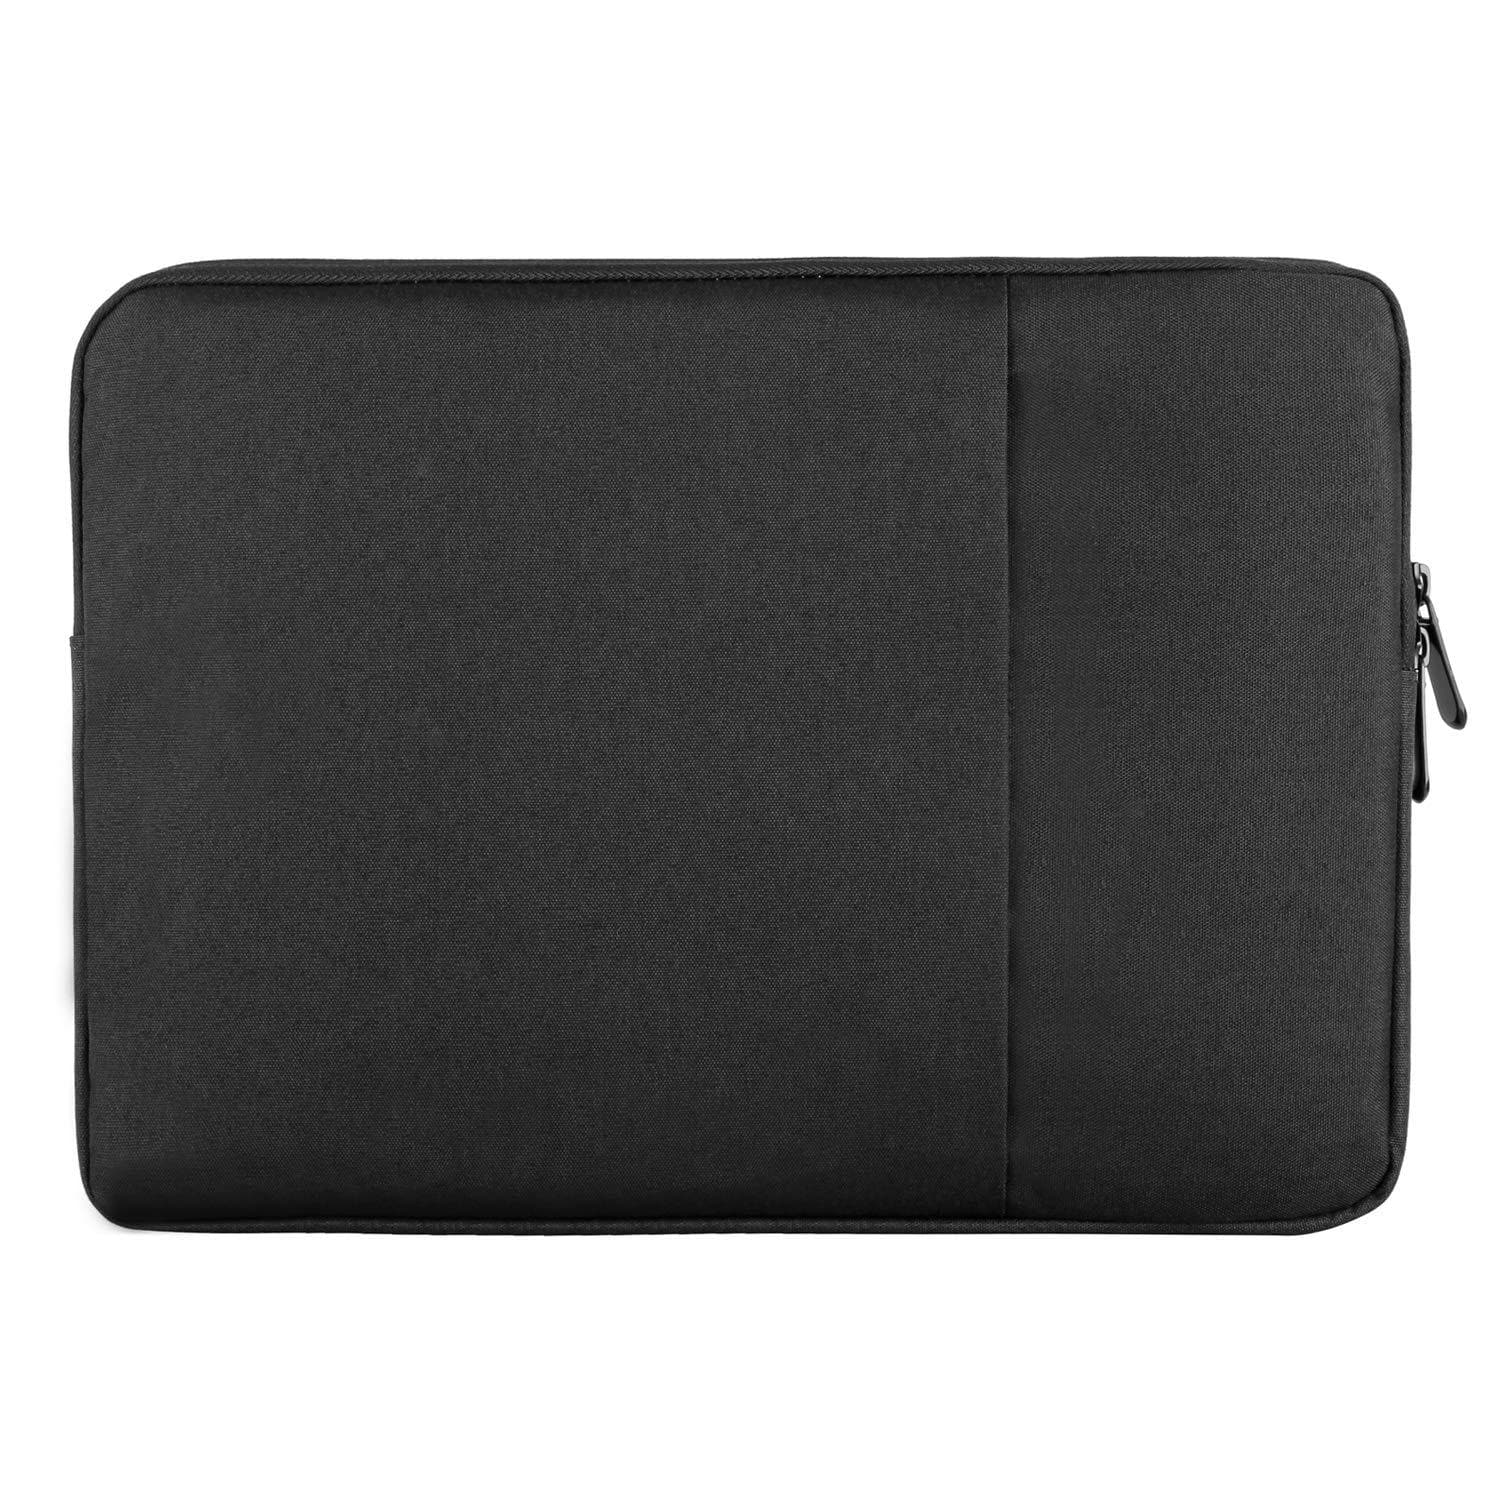 Uperfect Sleeve for Portable Monitors - 15-16 Inches